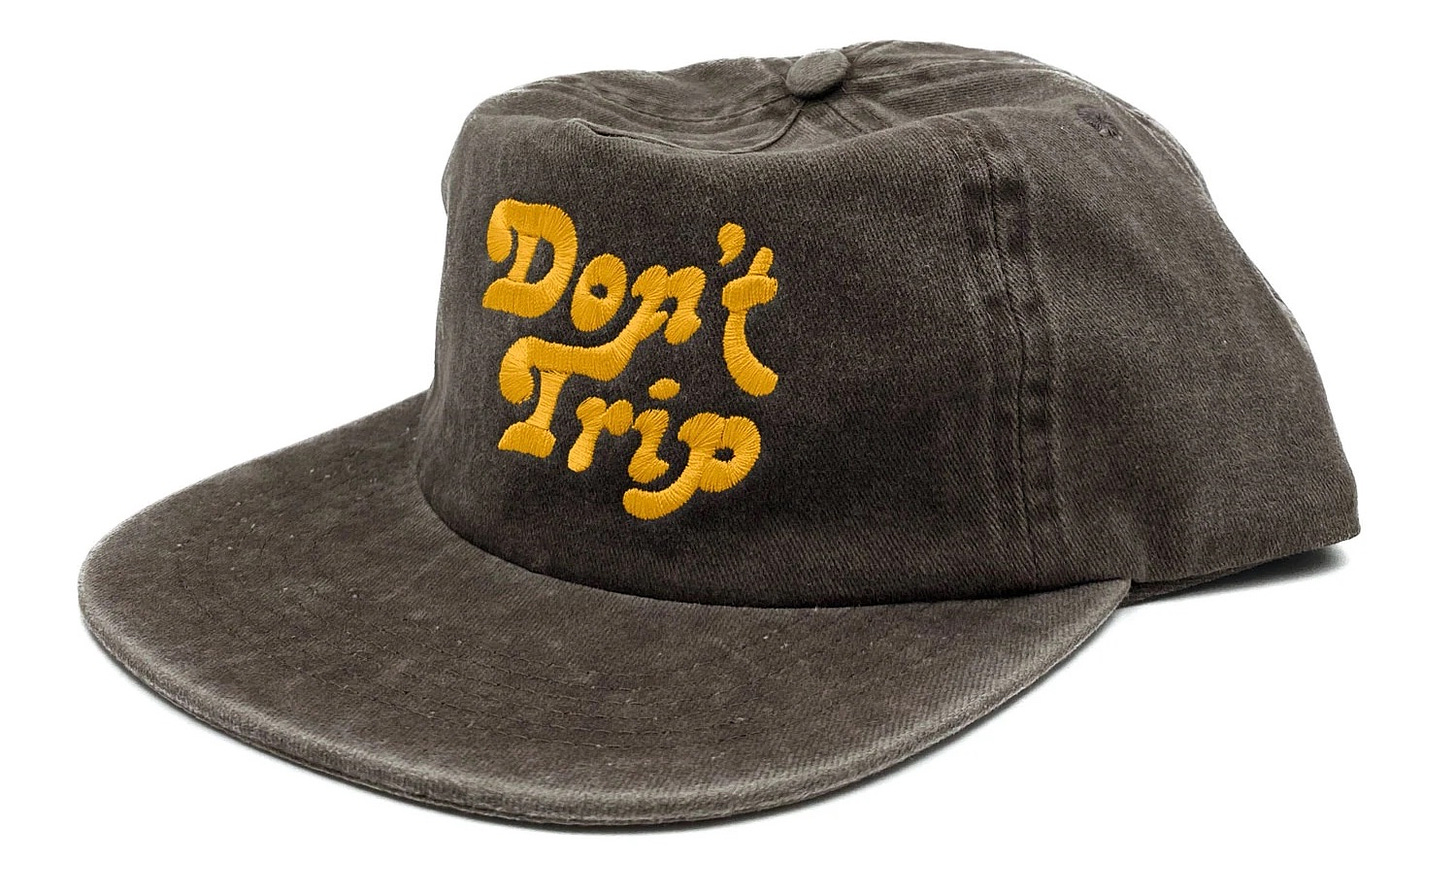 Gray hat that says 'Don't Trip'